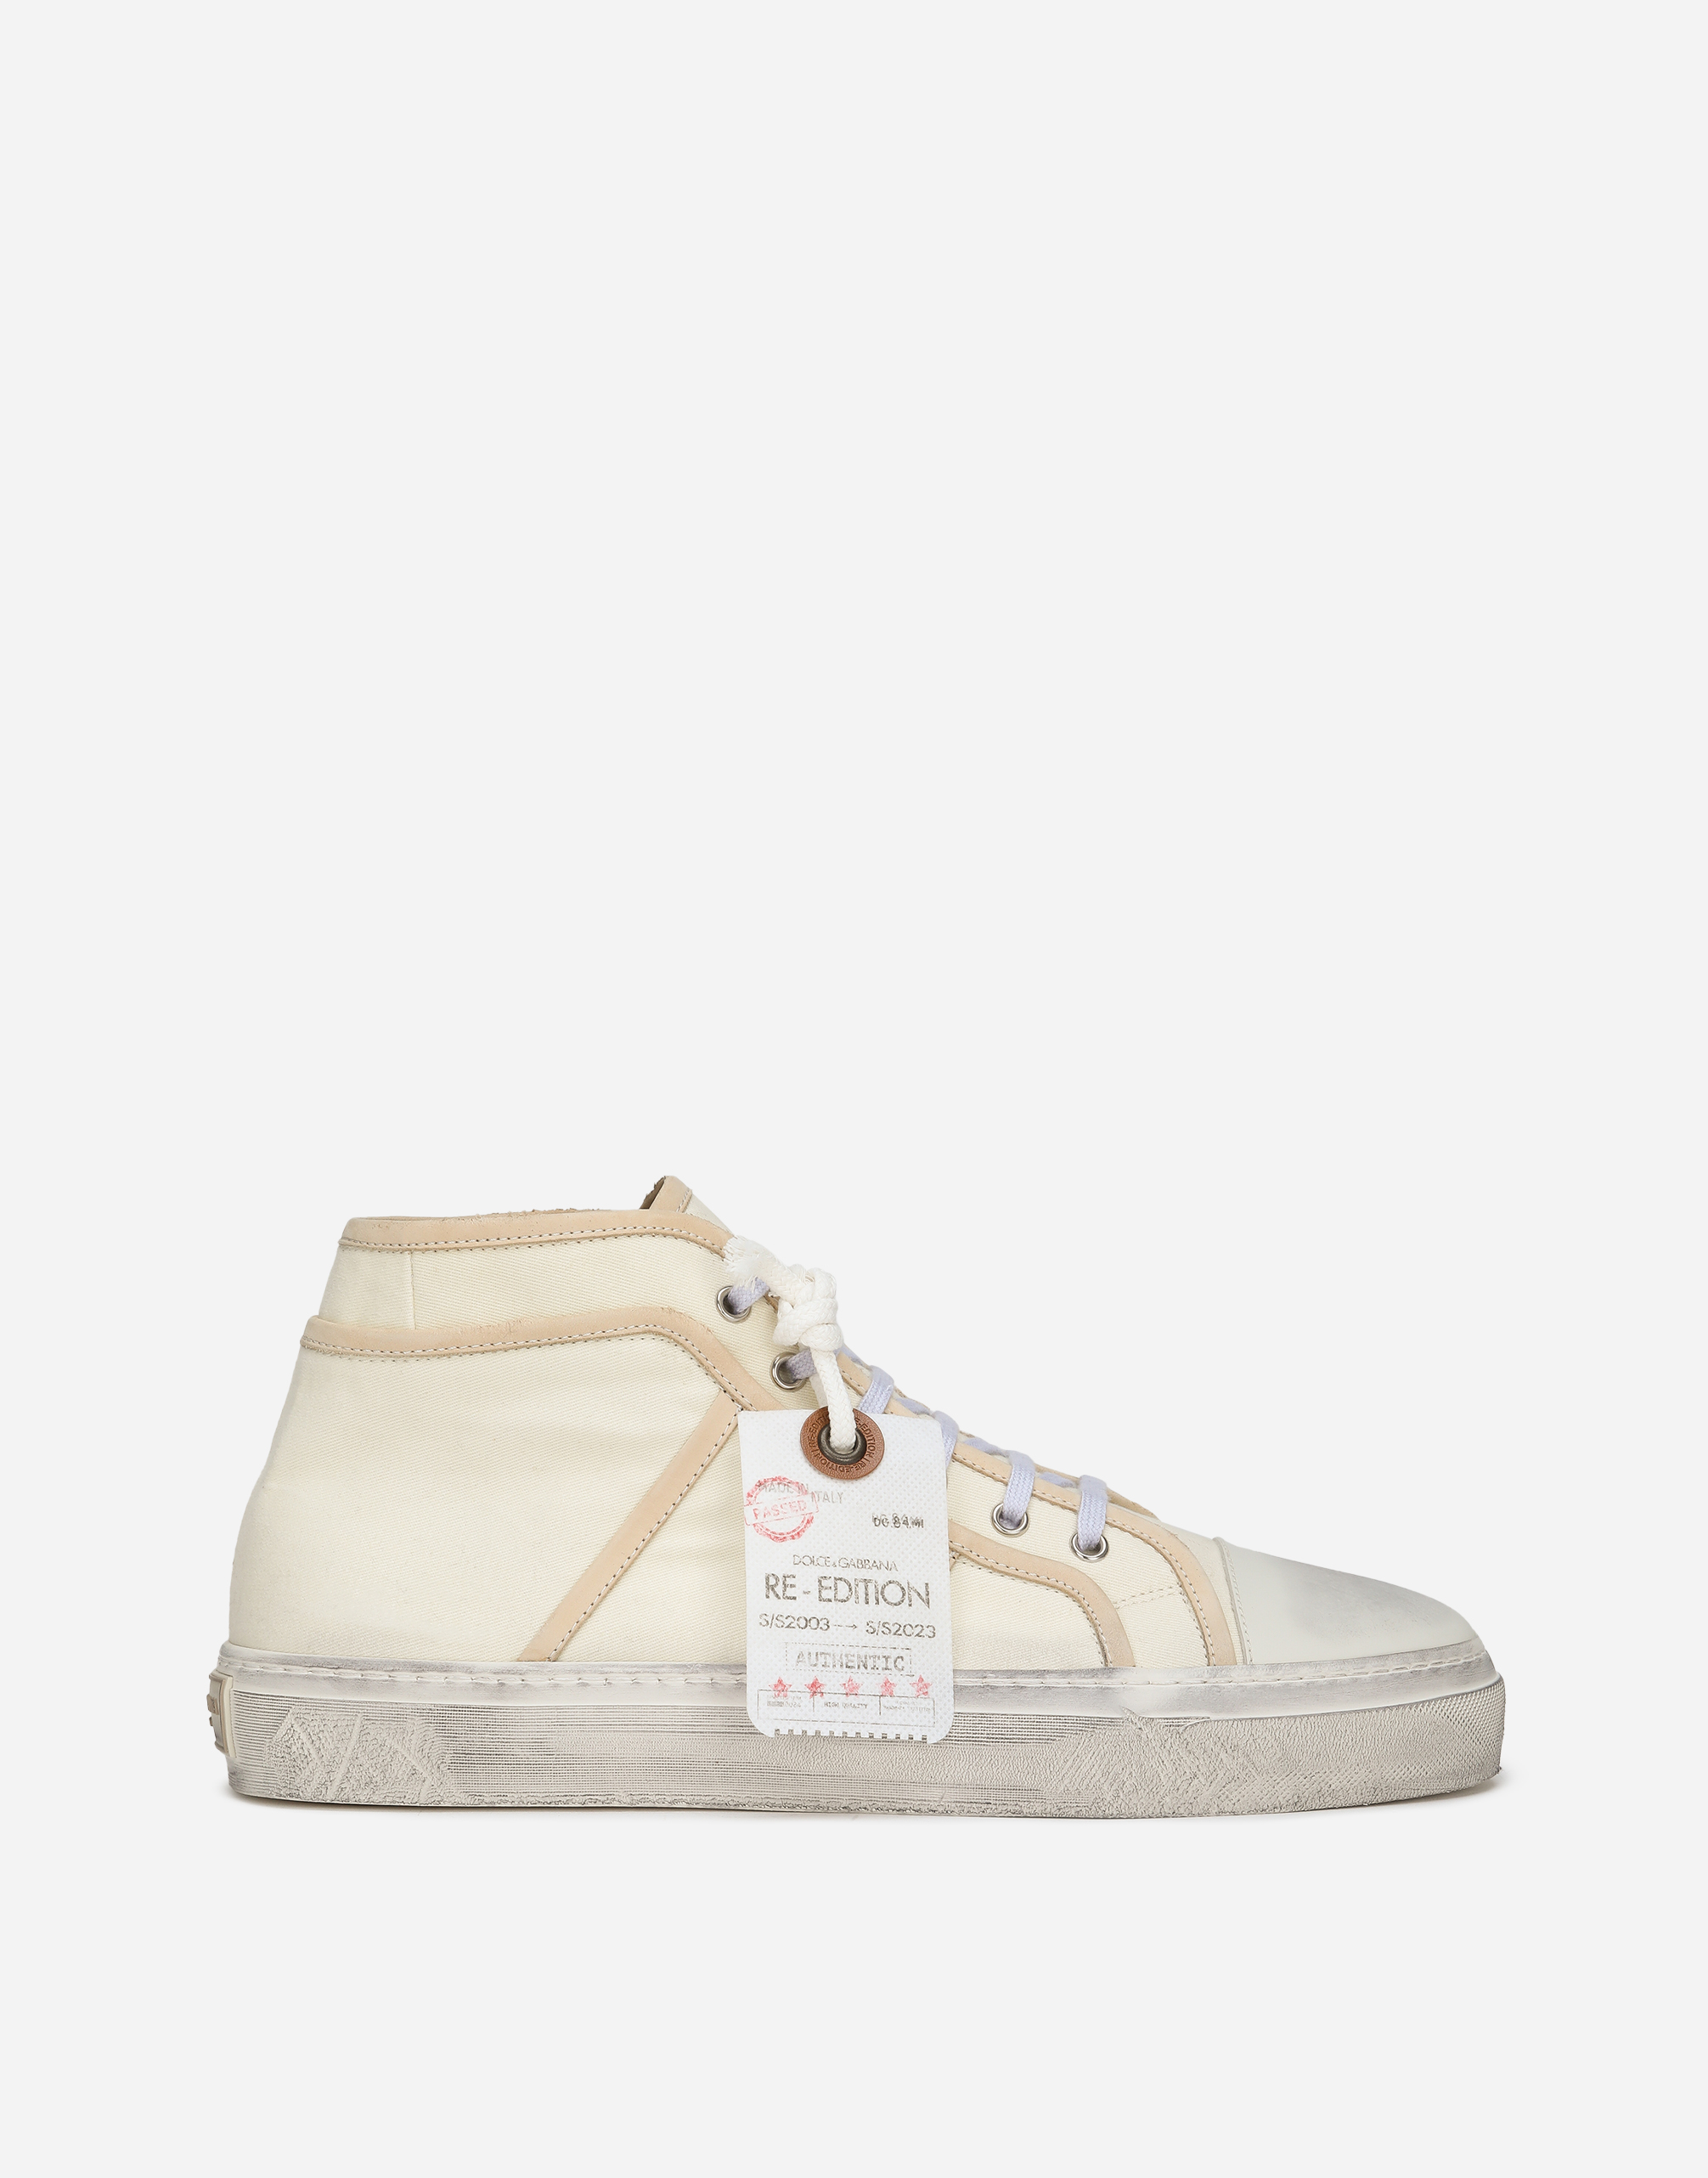 Dolce & Gabbana Fabric Vintage Mid-top Sneakers In Beige Ivory